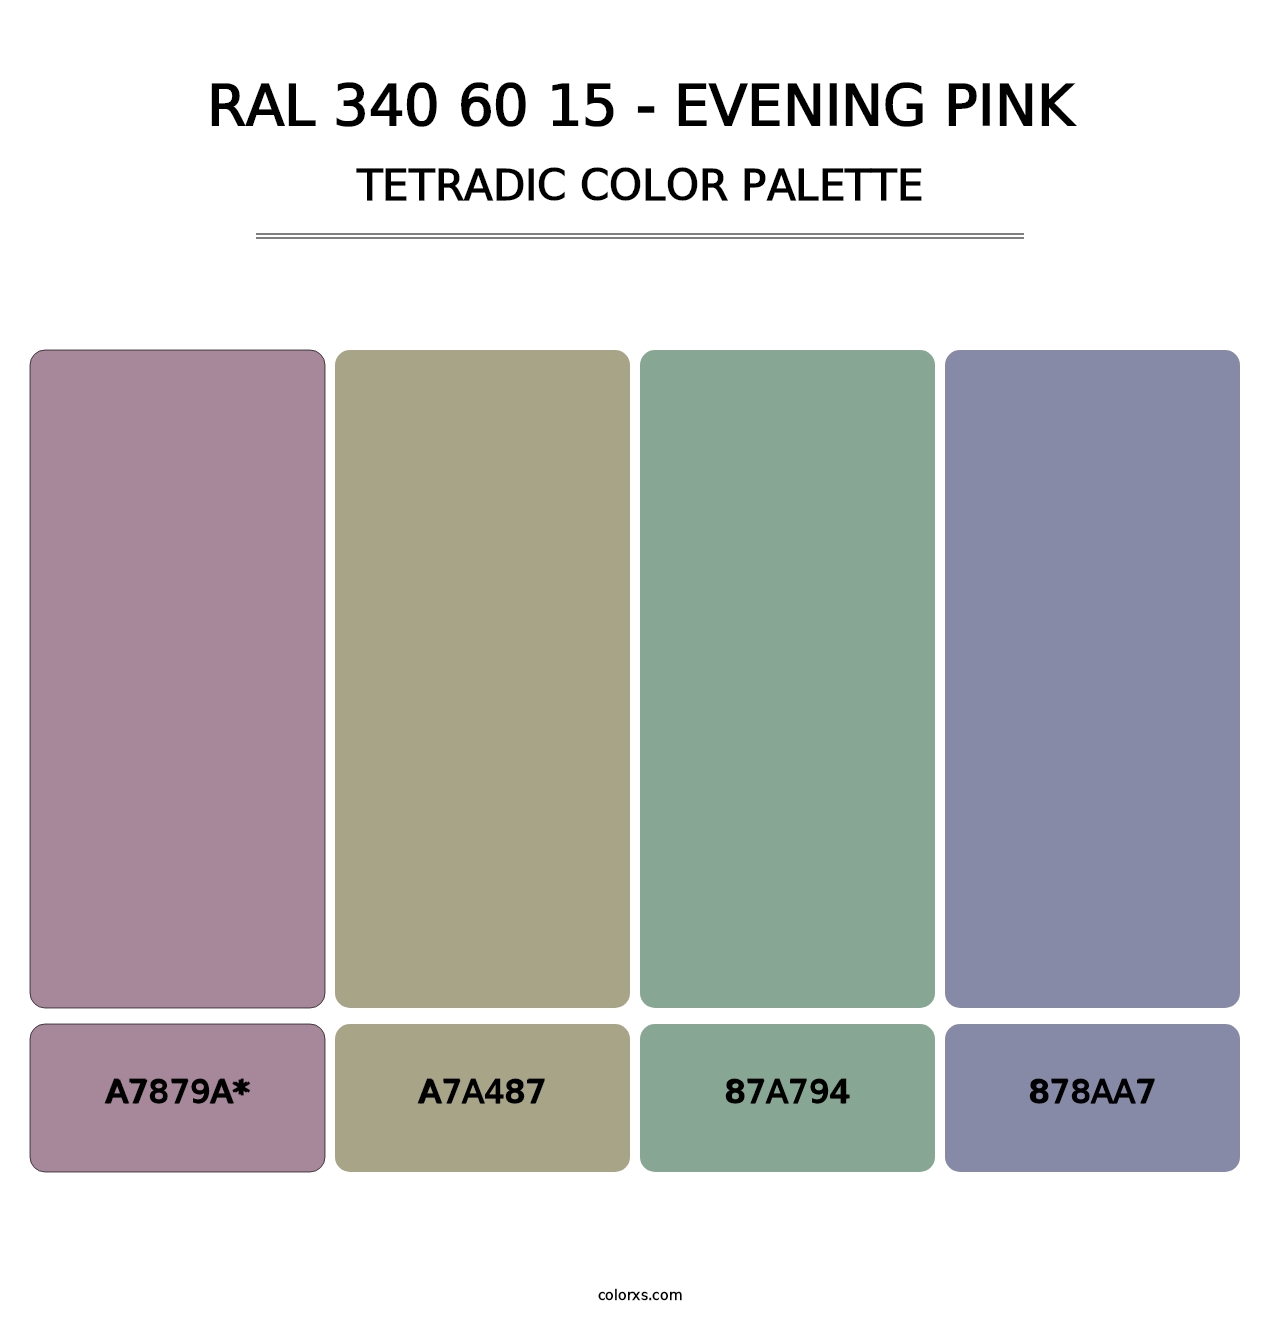 RAL 340 60 15 - Evening Pink - Tetradic Color Palette